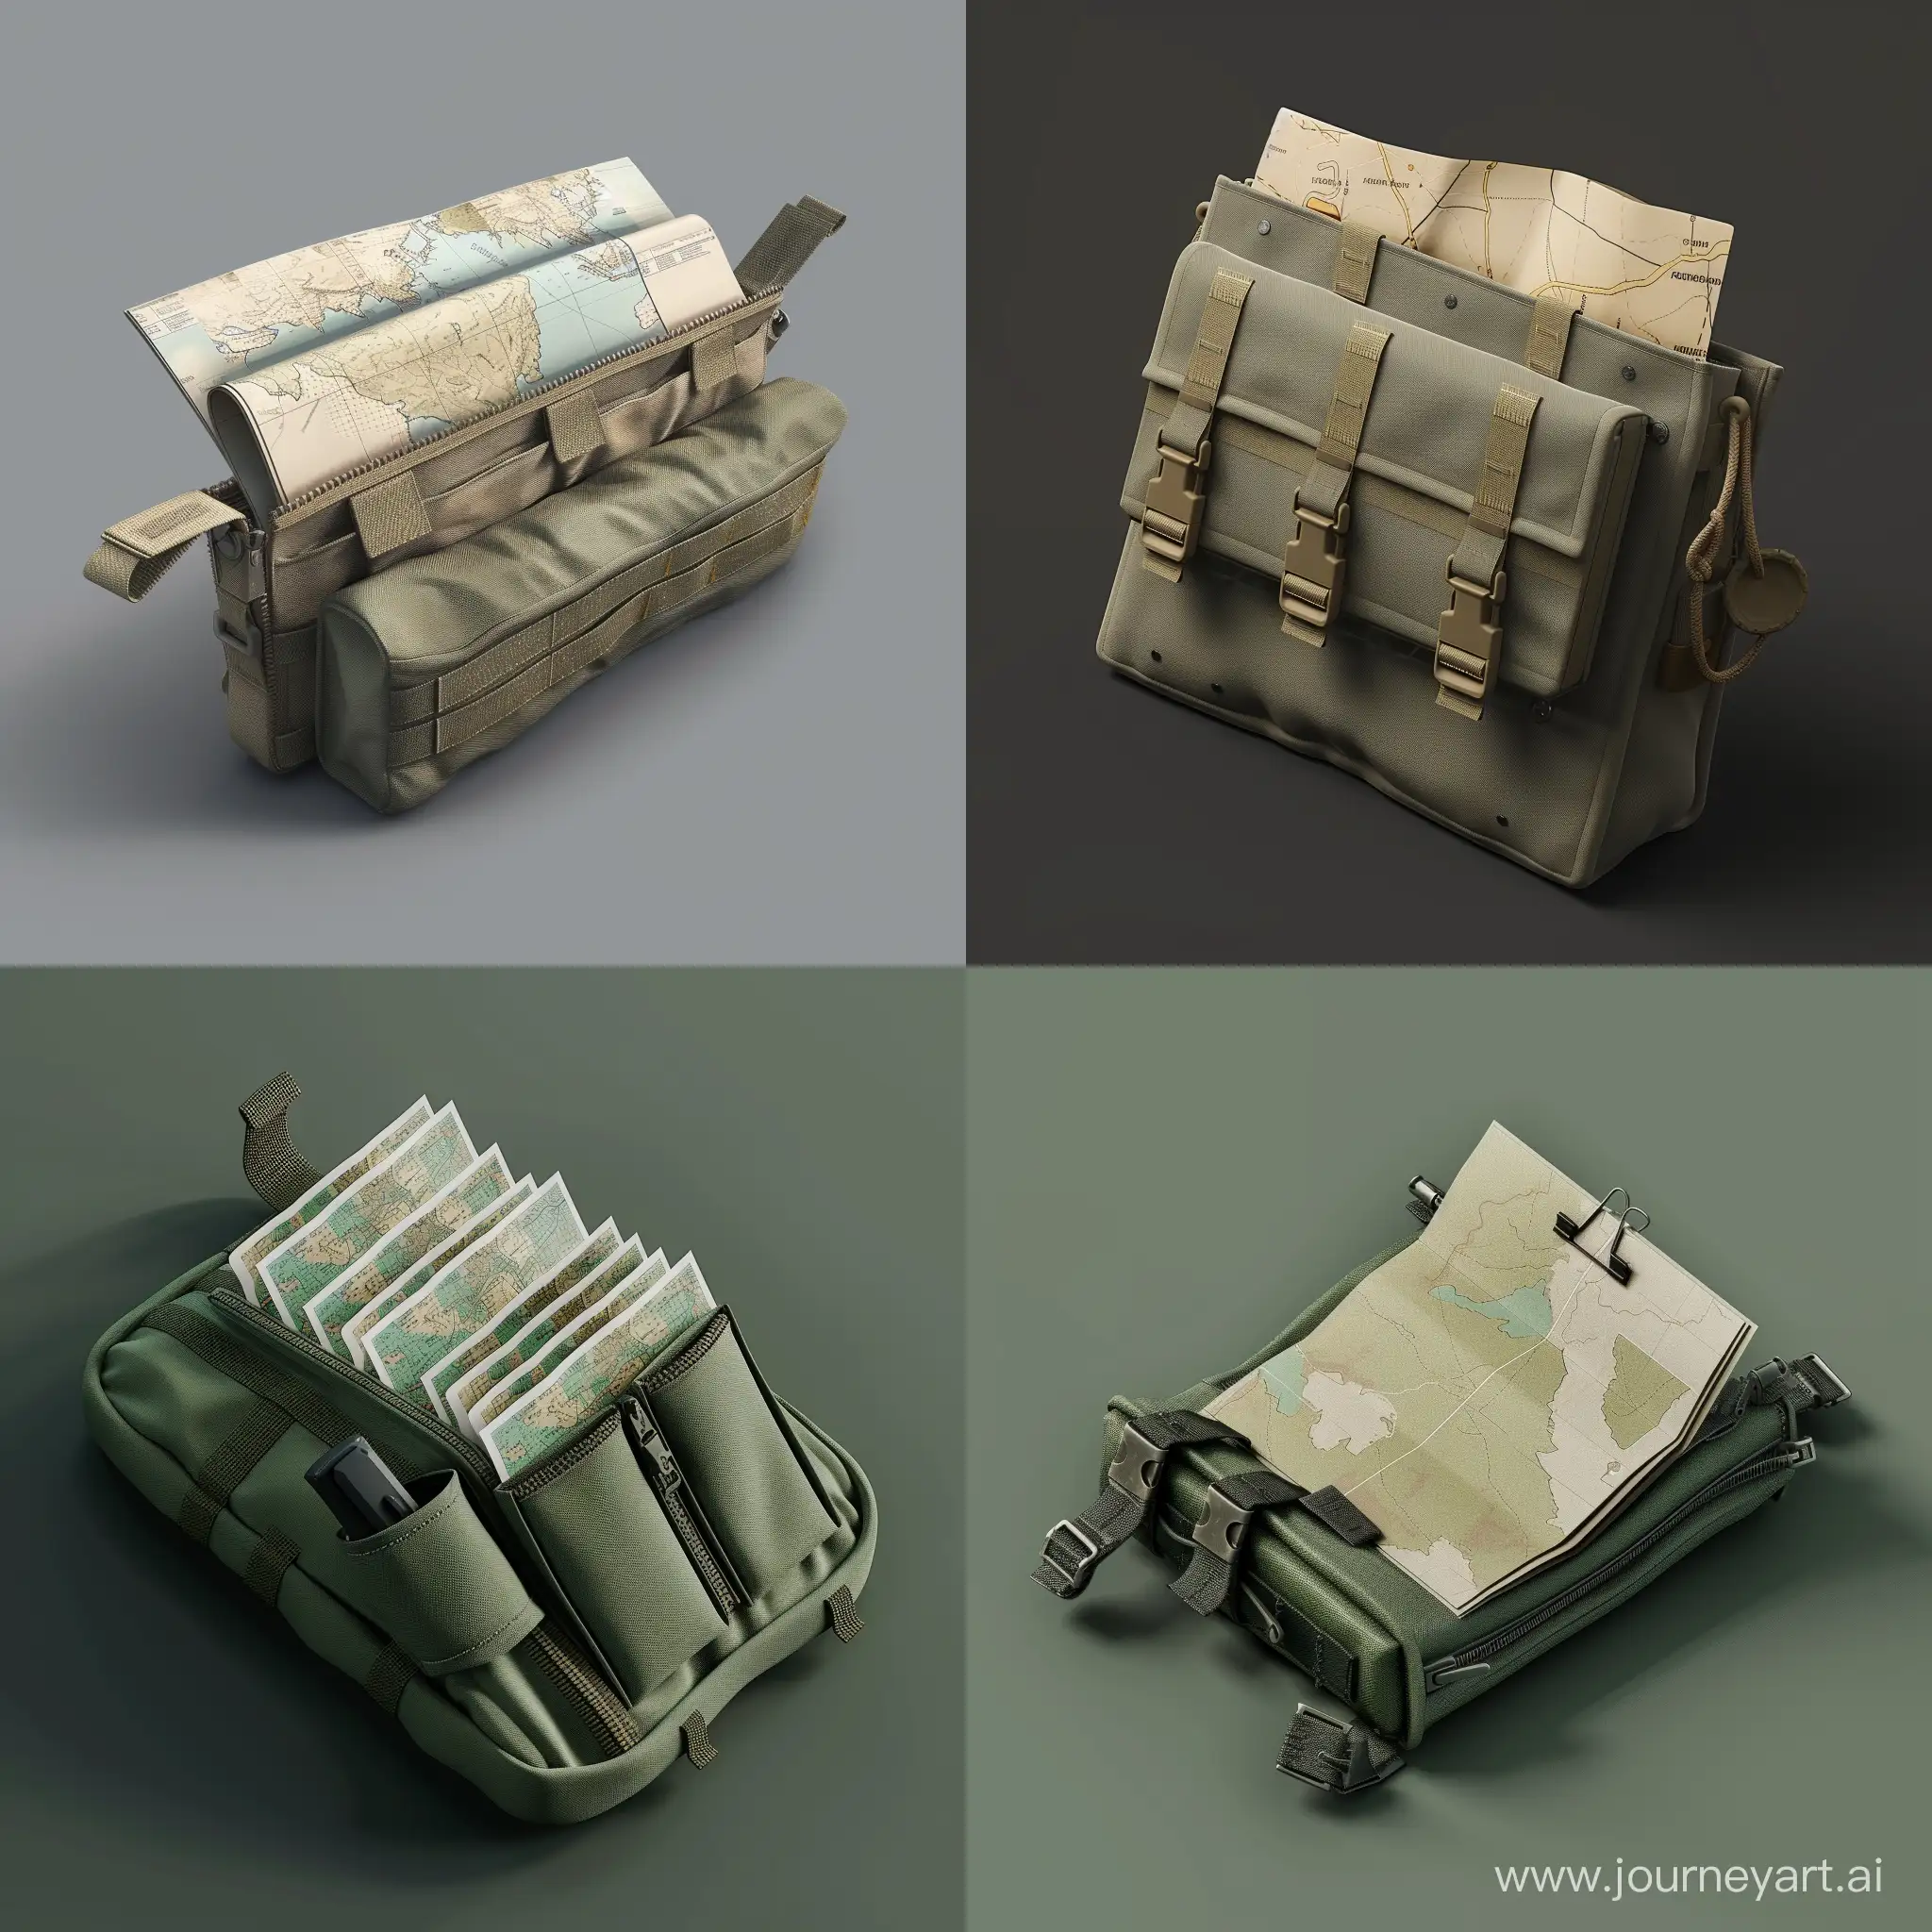 Isometric-Military-Mapping-Cartographic-Set-in-Tarkov-Style